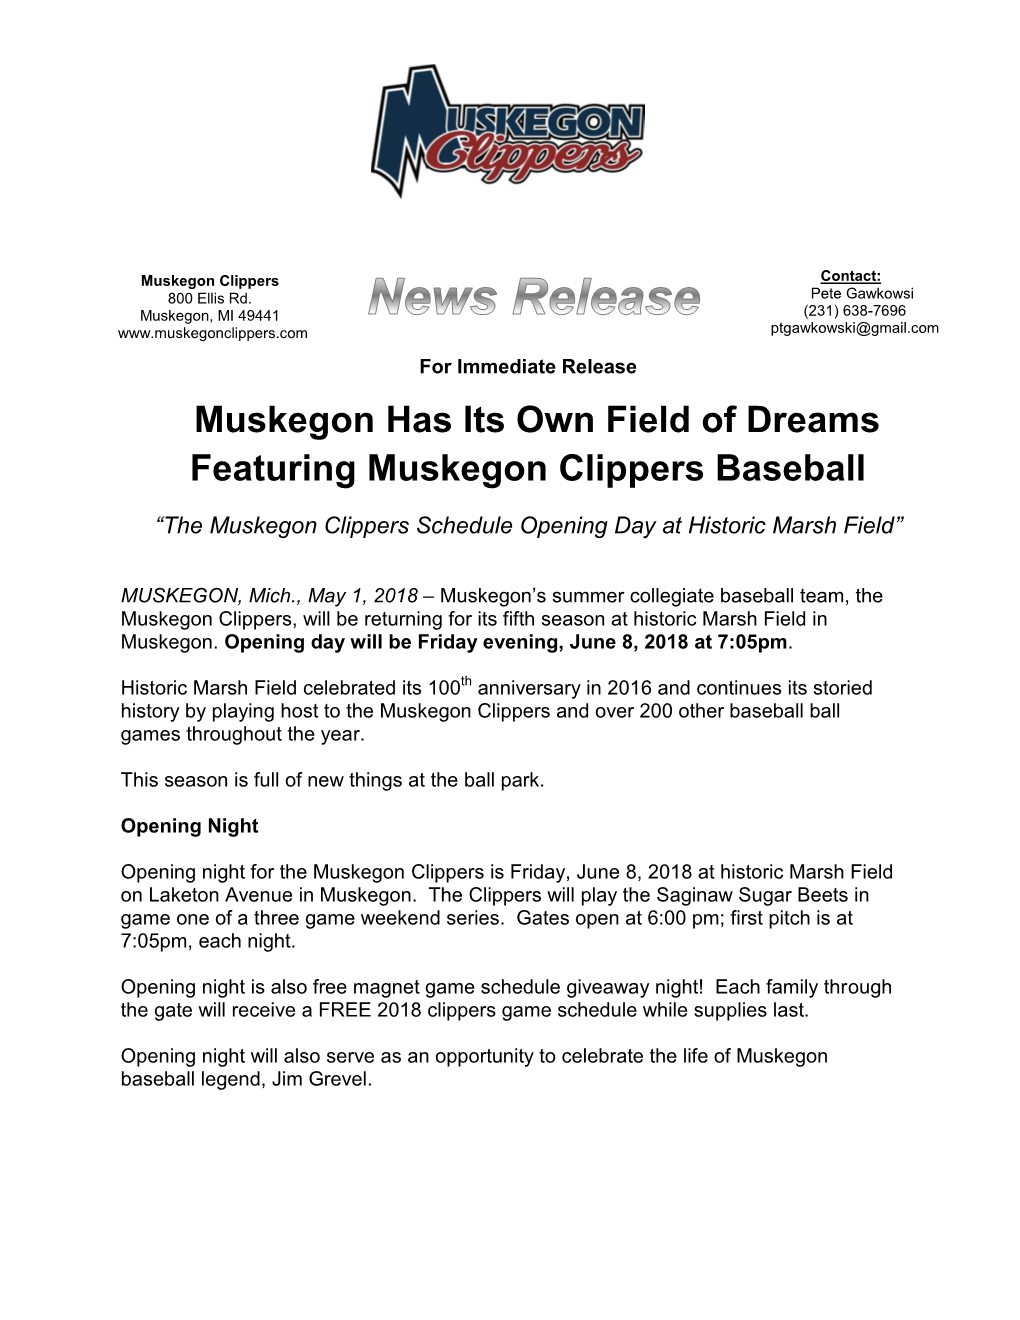 Muskegon Has Its Own Field of Dreams Featuring Muskegon Clippers Baseball